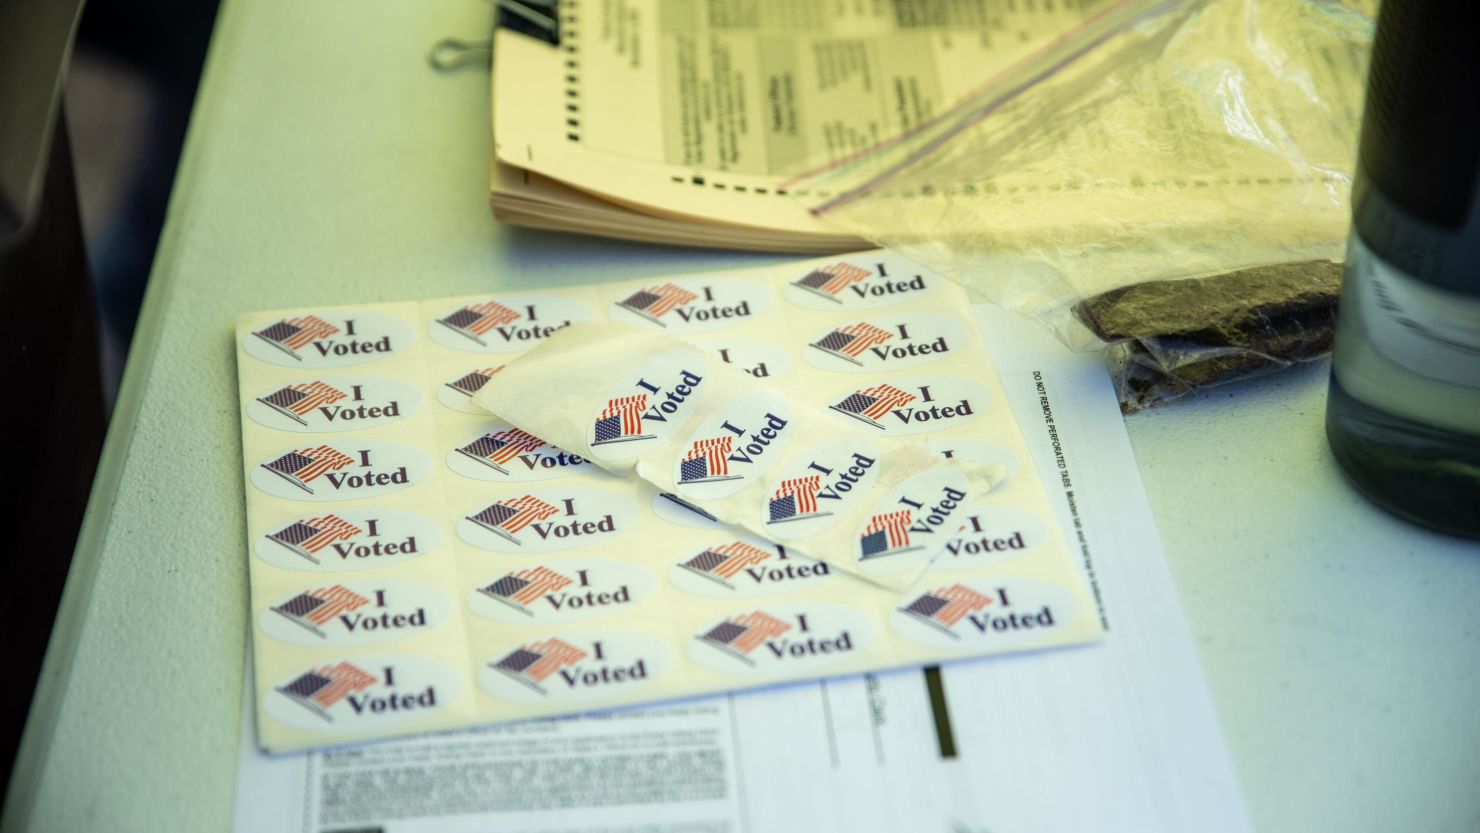 "I voted" stickers and other forms line a table at a ballot drop off location on October 13, 2020 in Austin, Texas. 